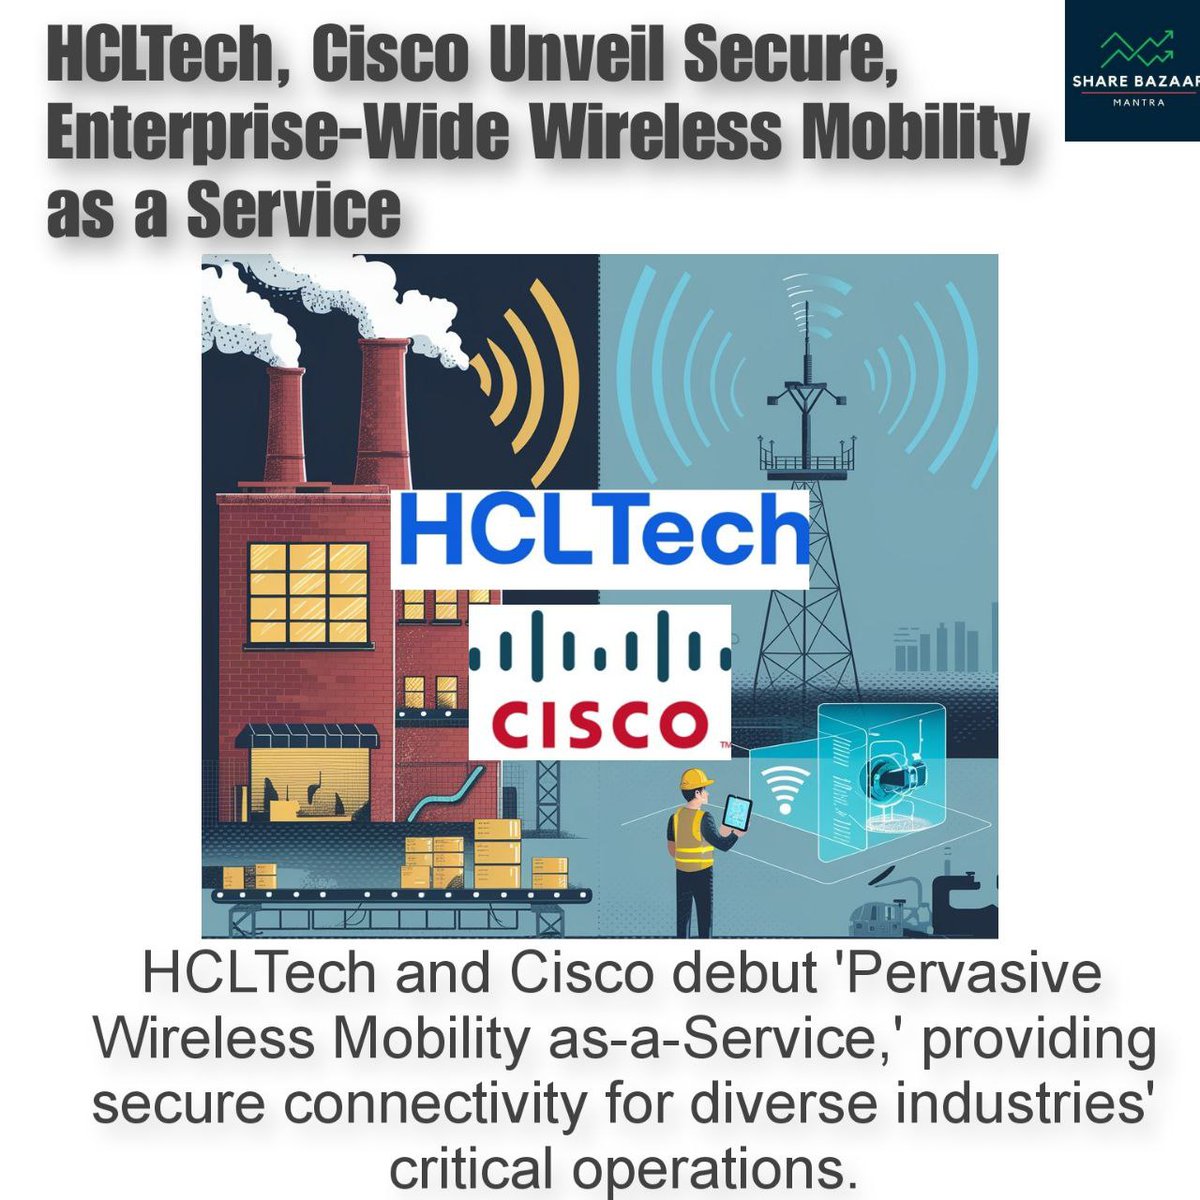 Pervasive Wireless Mobility connects factories to a new era of industrial efficiency. #HCLCisco #WirelessFactory #FutureofManufacturing